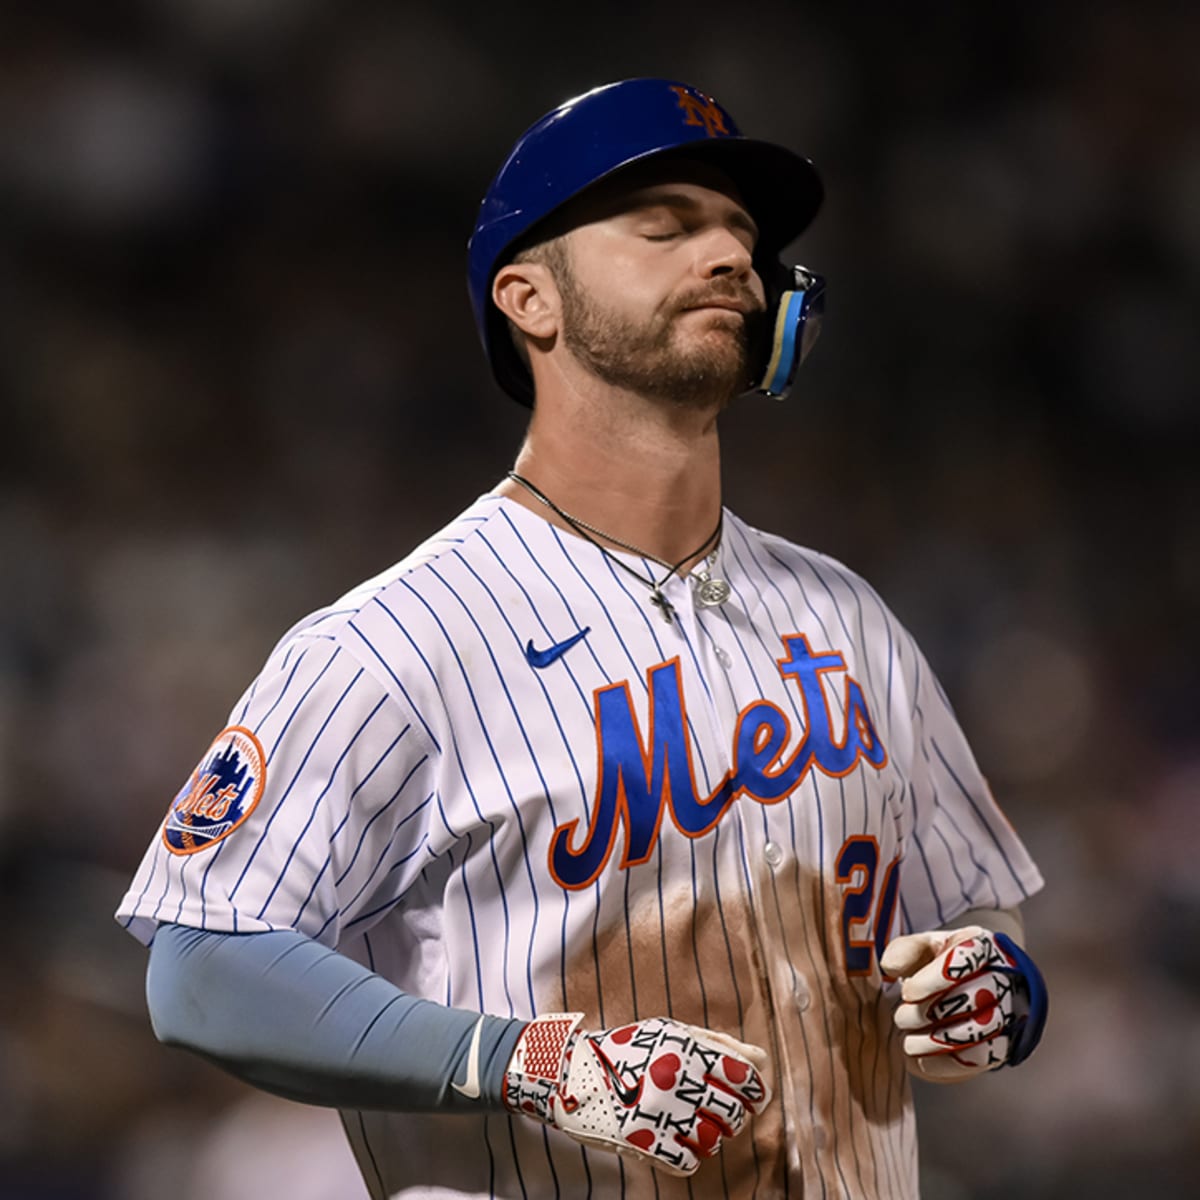 New York Mets fans react to Pete Alonso hitting a home run after sprinting  to dugout to get ready for his at-bat: He's been preparing for this